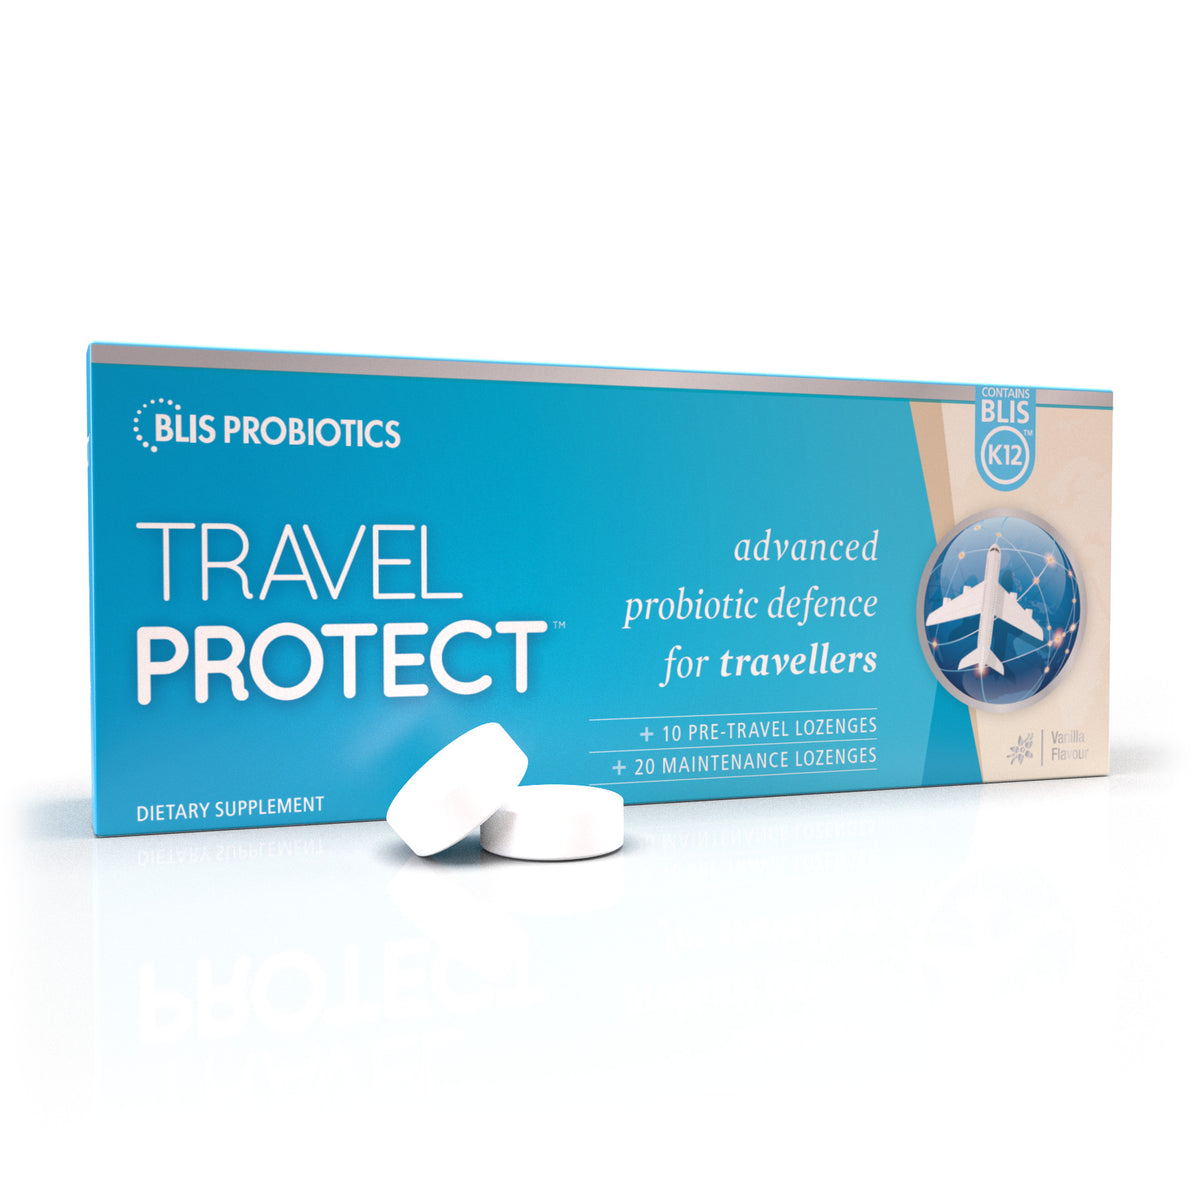 Image of Blis Probiotics Travel Protect box and lozenges - advanced probiotic defence for travellers. | Blis Probiotics